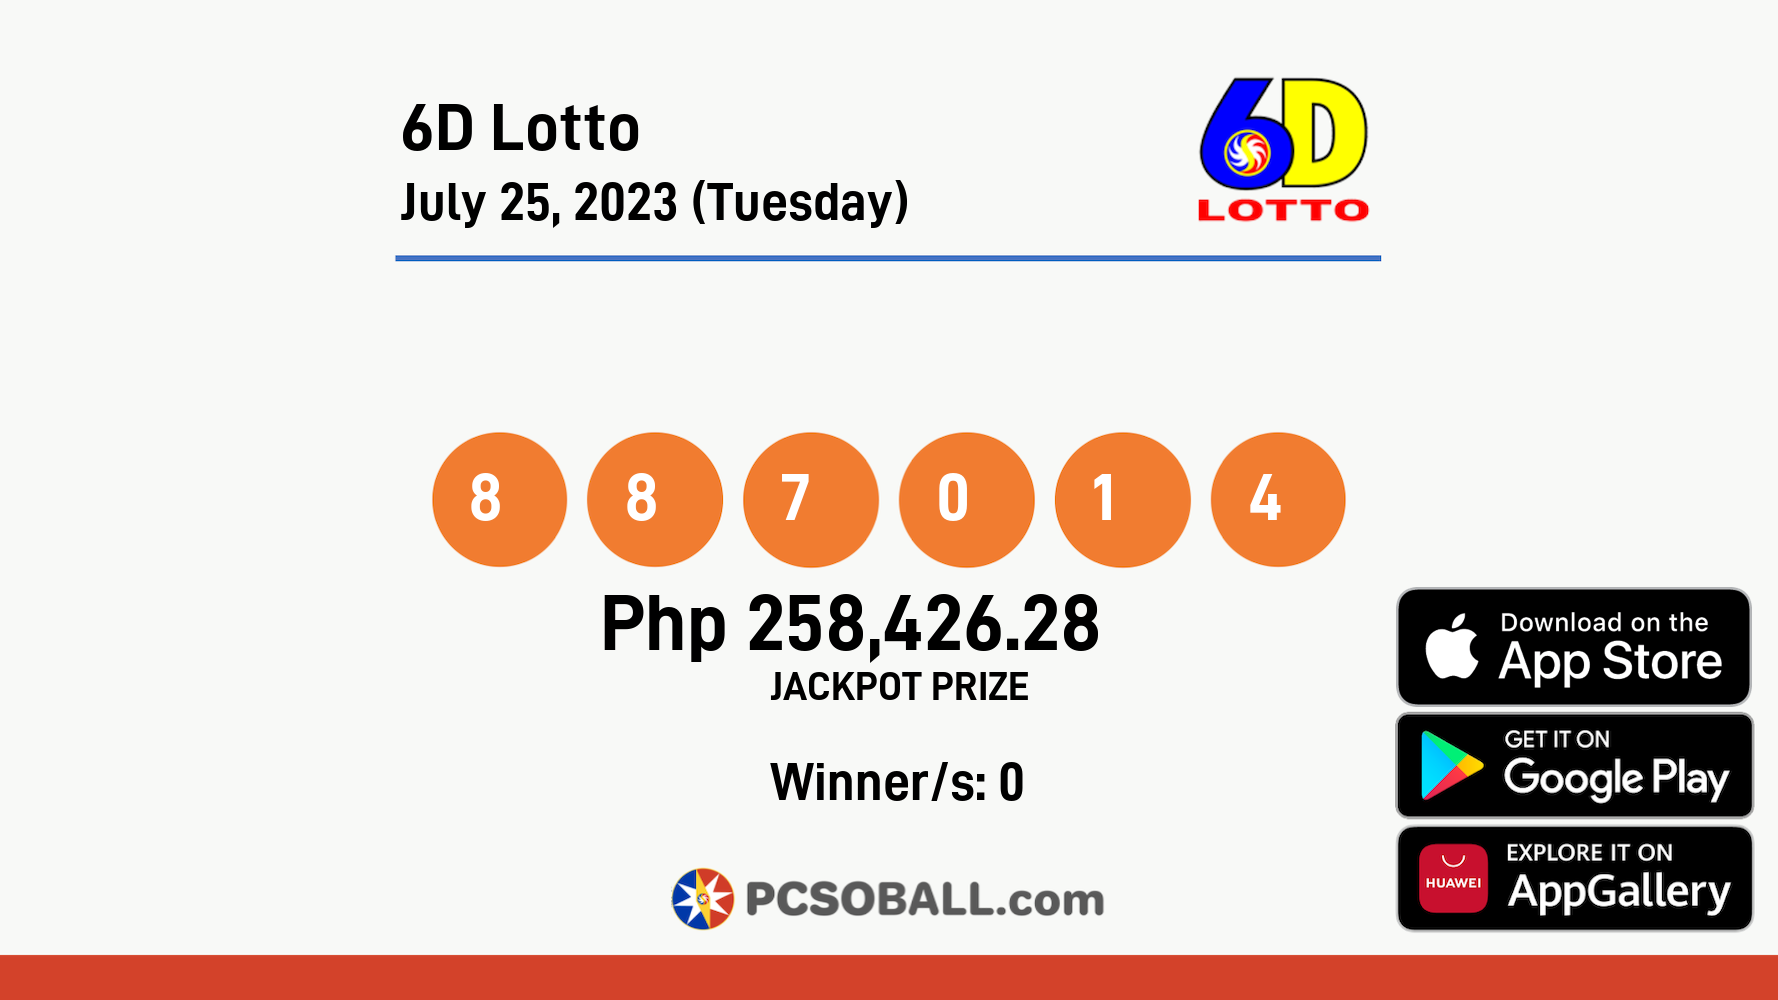 6D Lotto July 25, 2023 (Tuesday) Result